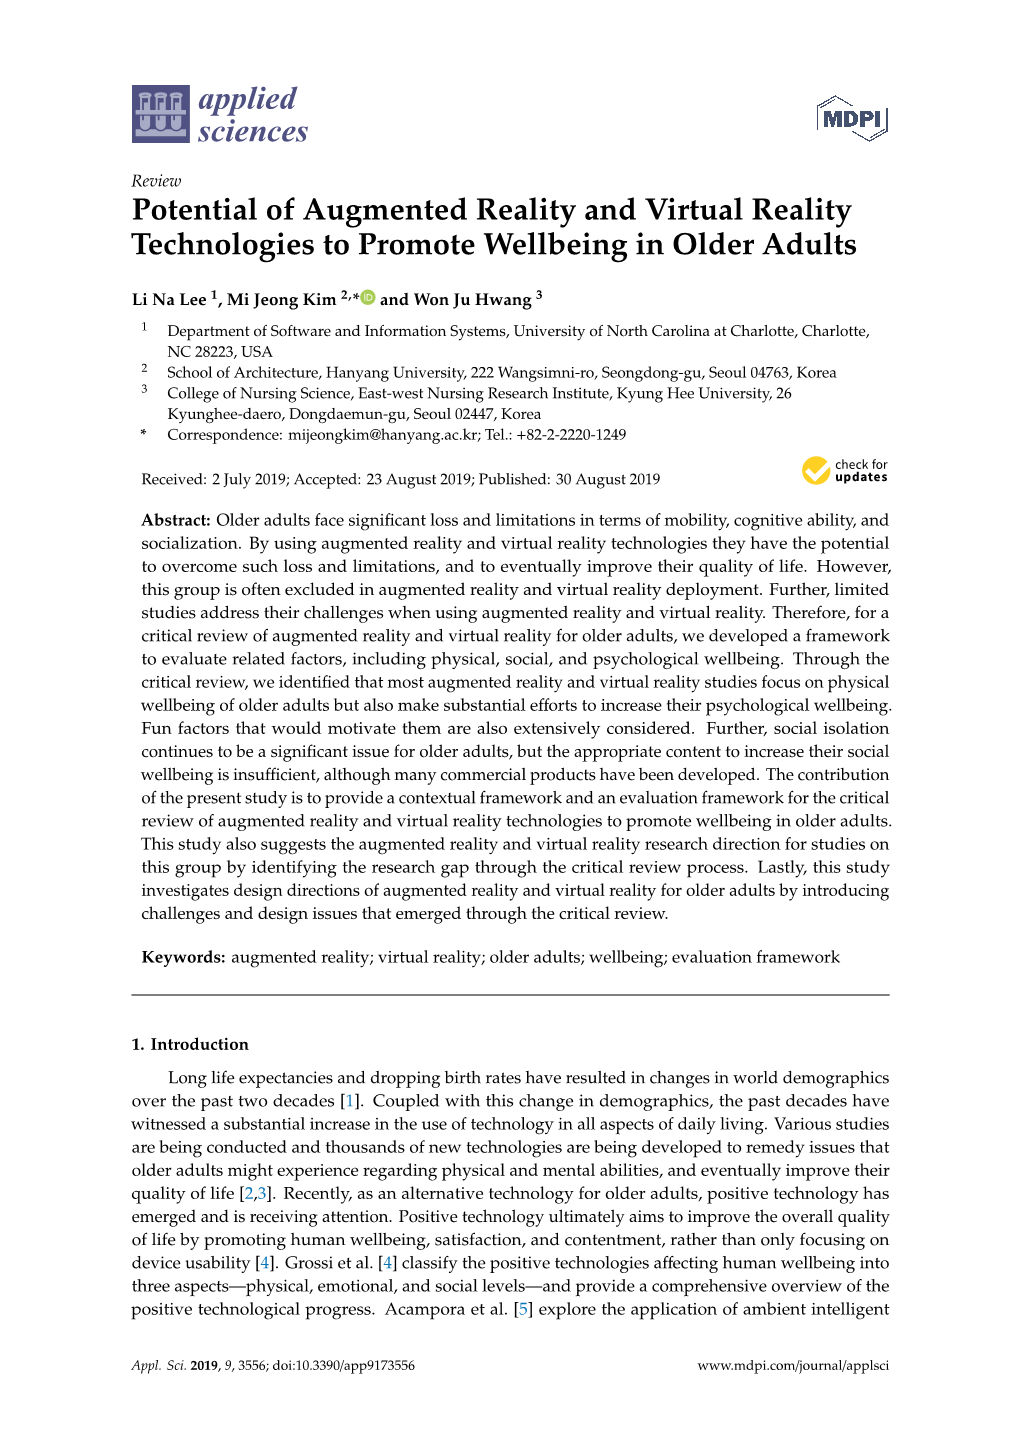 Potential of Augmented Reality and Virtual Reality Technologies to Promote Wellbeing in Older Adults